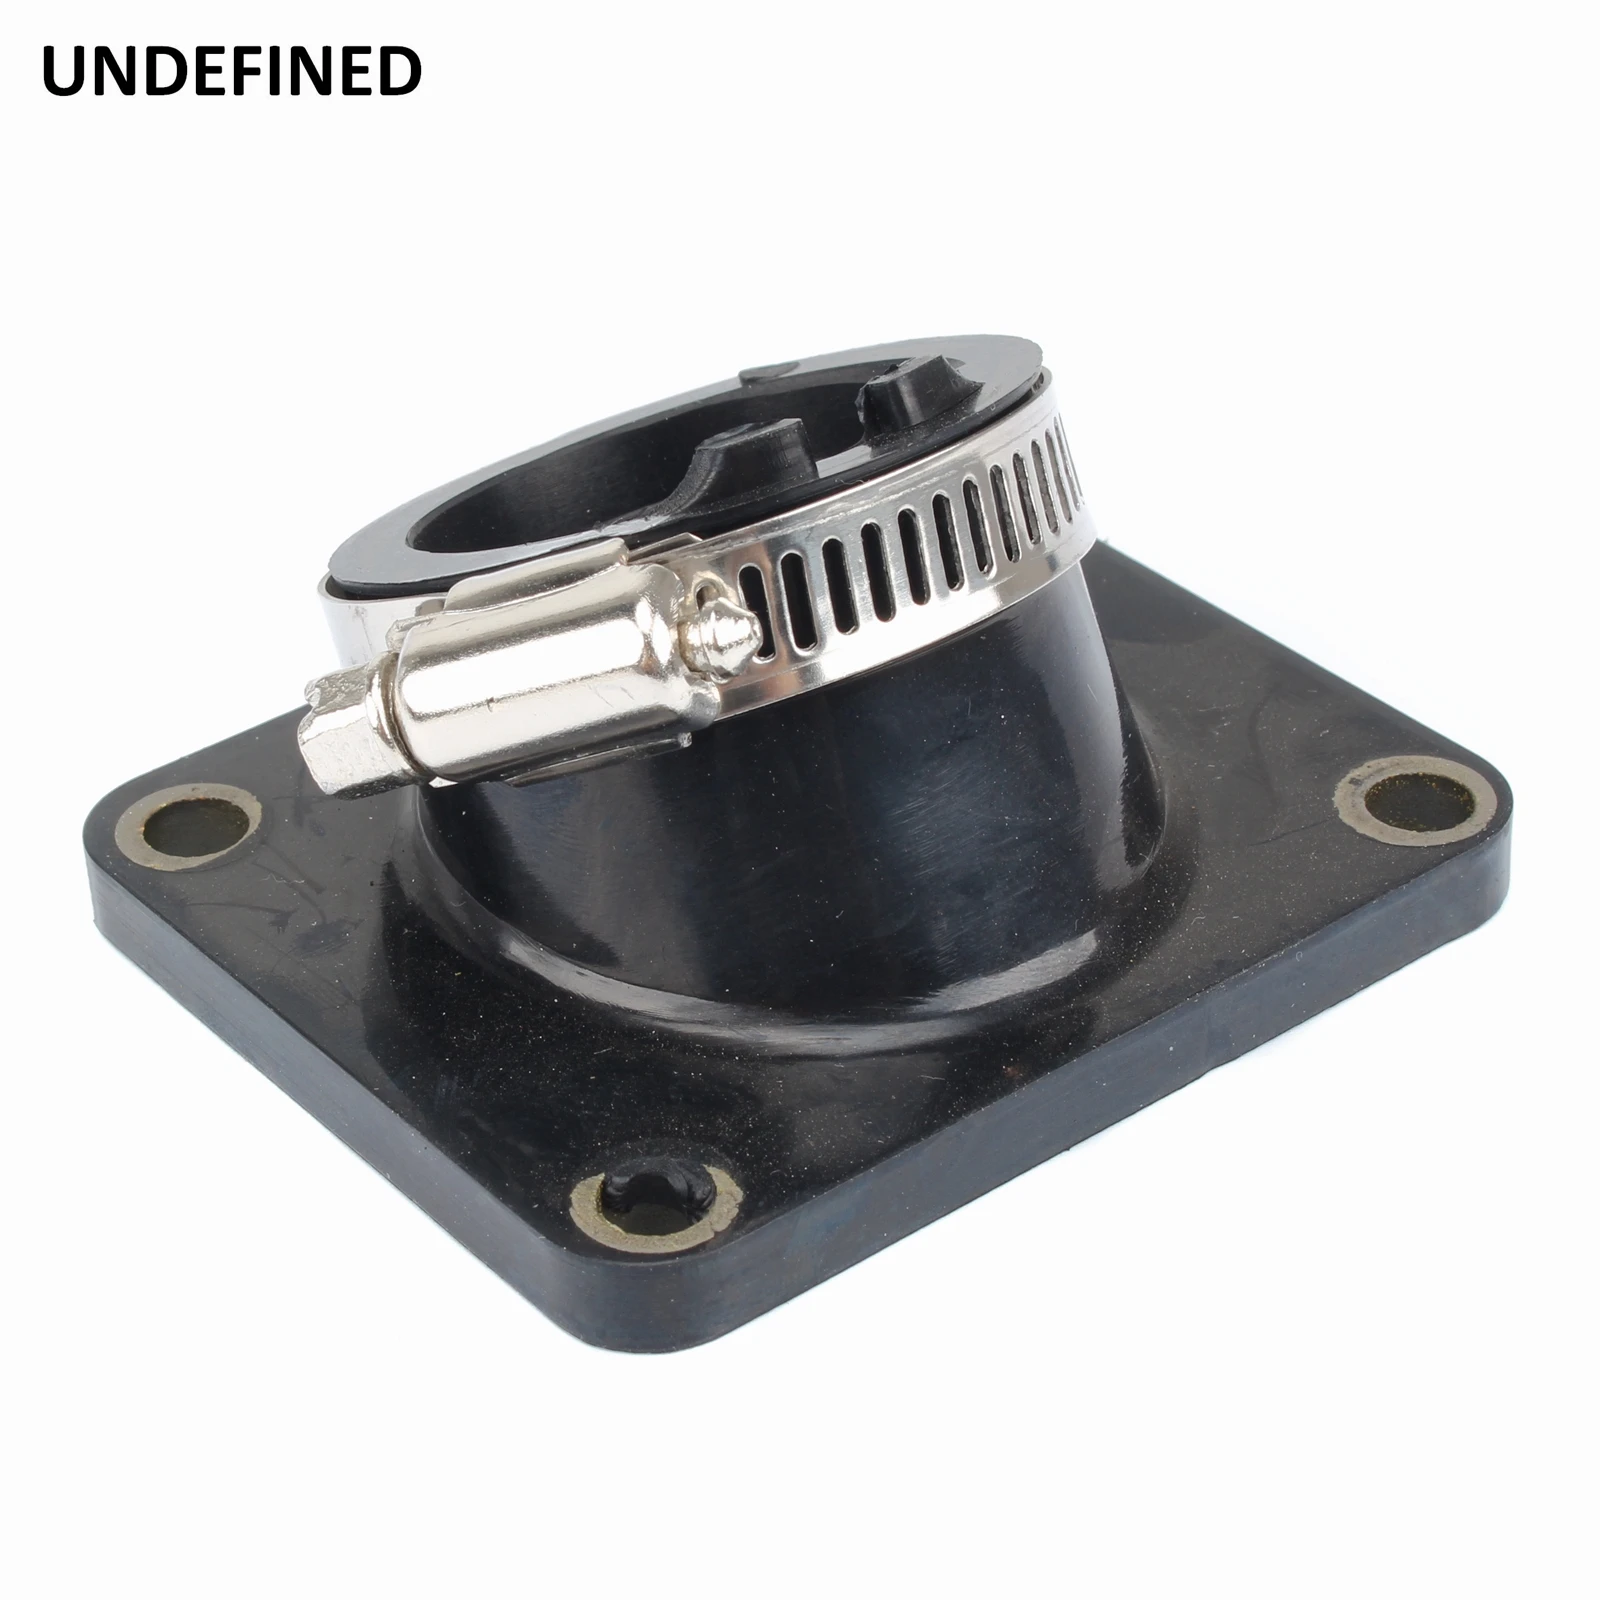 Motorcycle Carburetor Interface Adapter Intake Manifold For Yamaha AG100 DT100 DT125 MX100 RT100 76-83/90-20